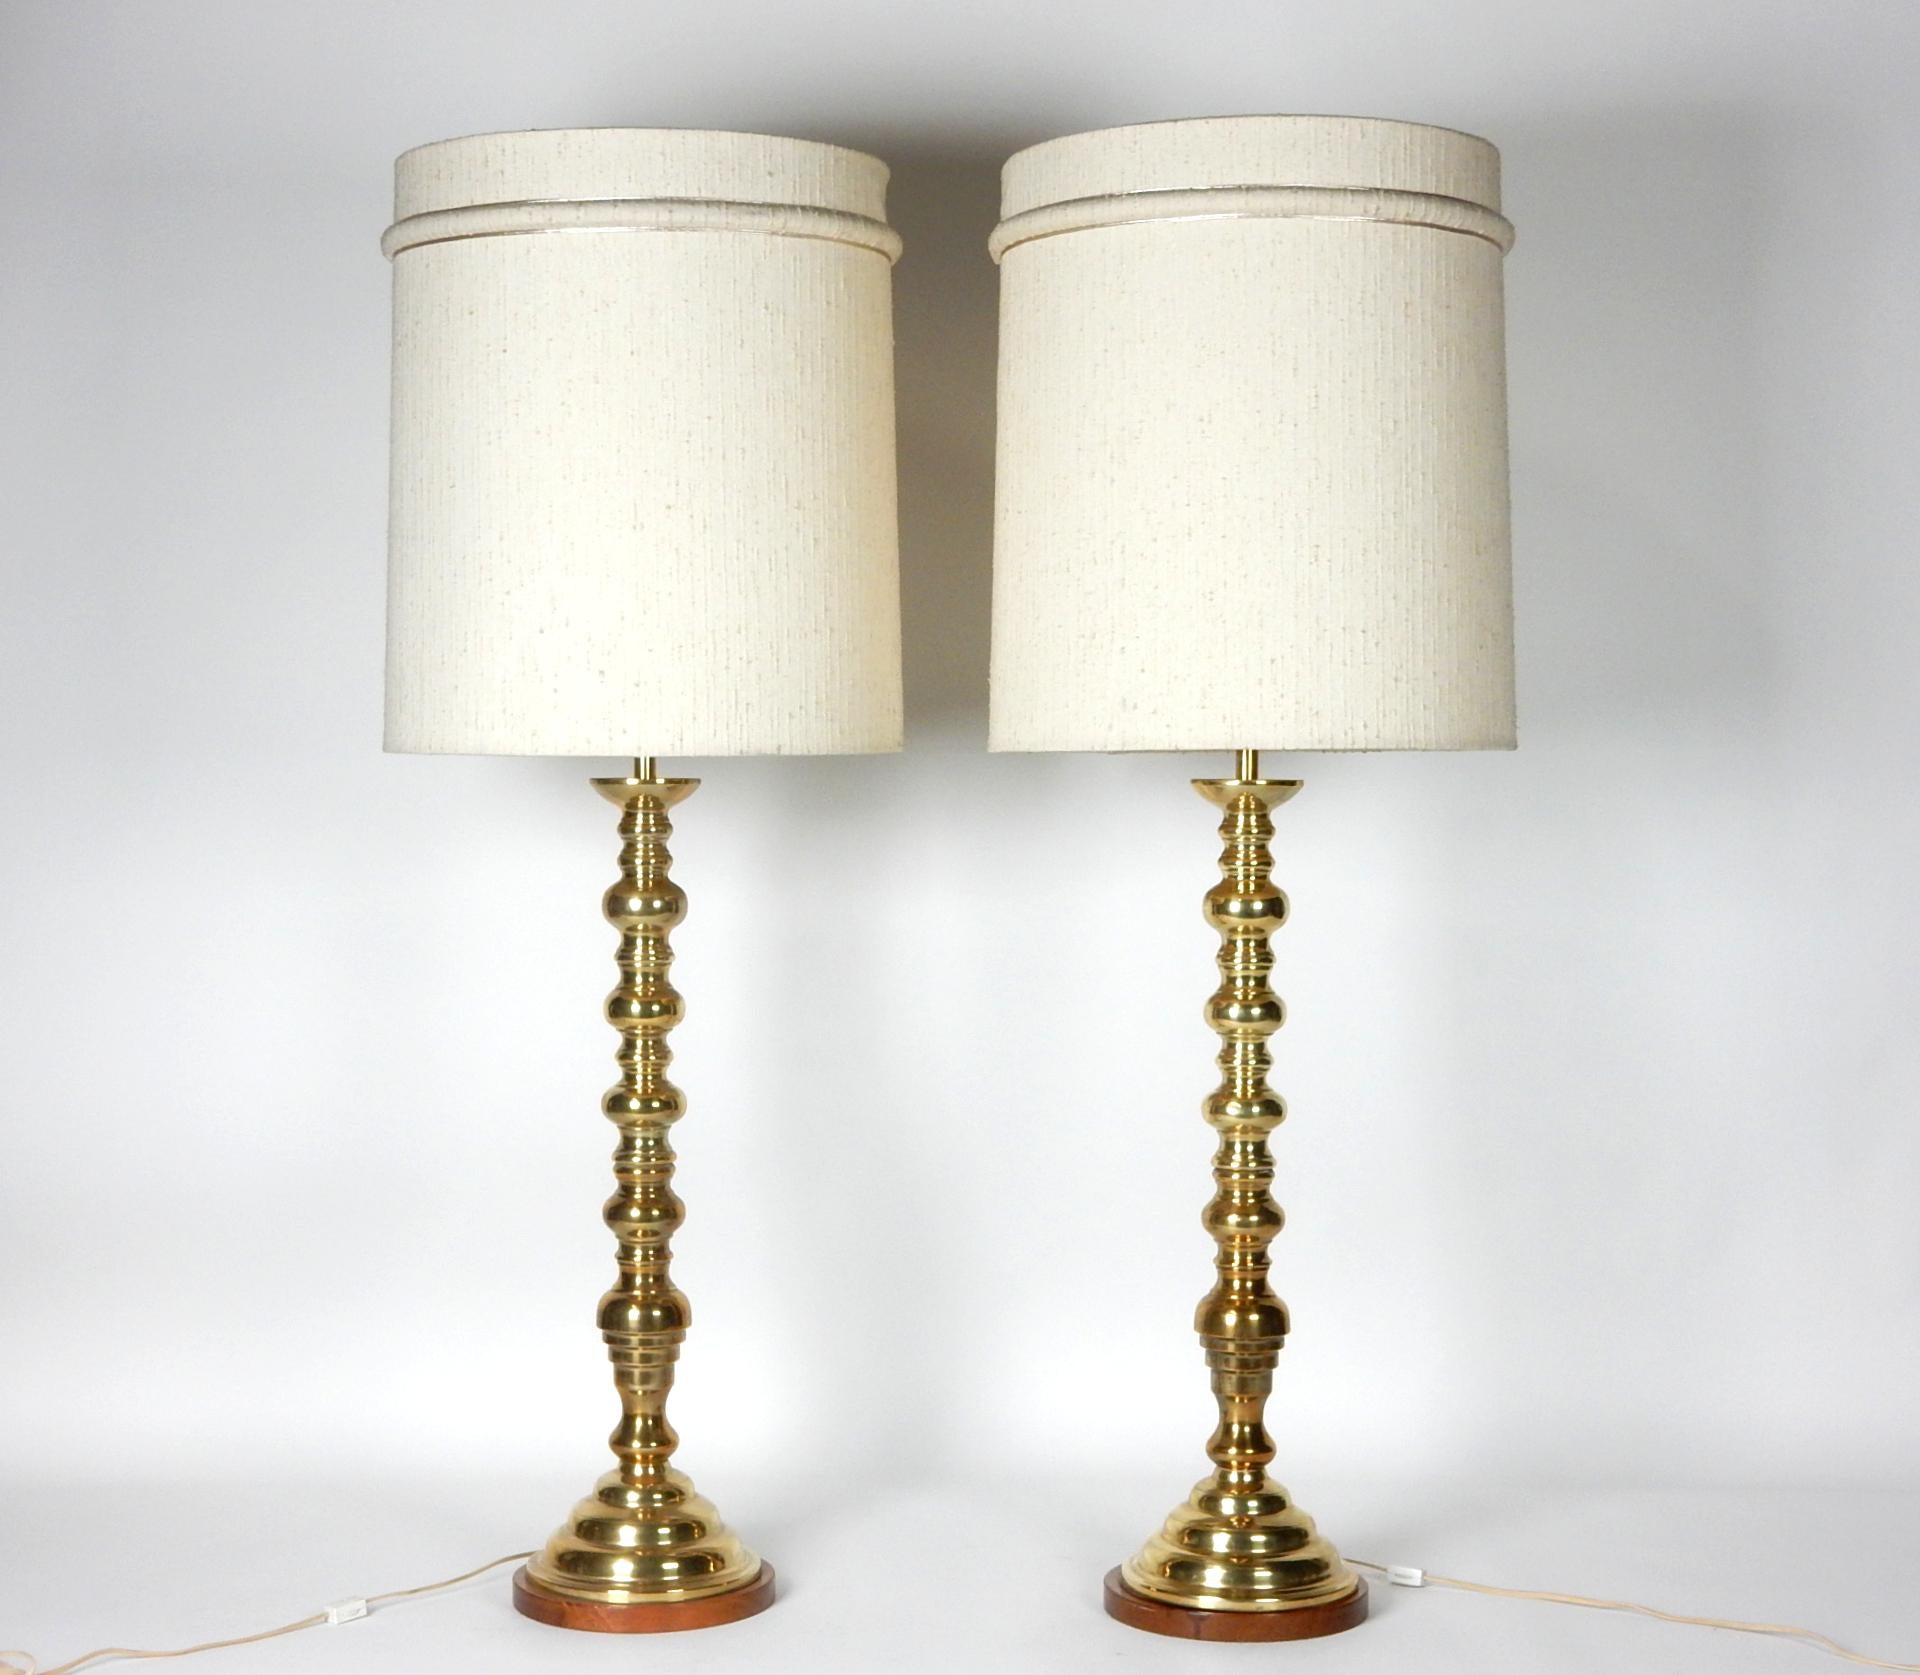 Monumental pair of solid brass candlestick table lamps.
Walnut base and double standard bulb sockets.
Not marked or signed by maker.
44